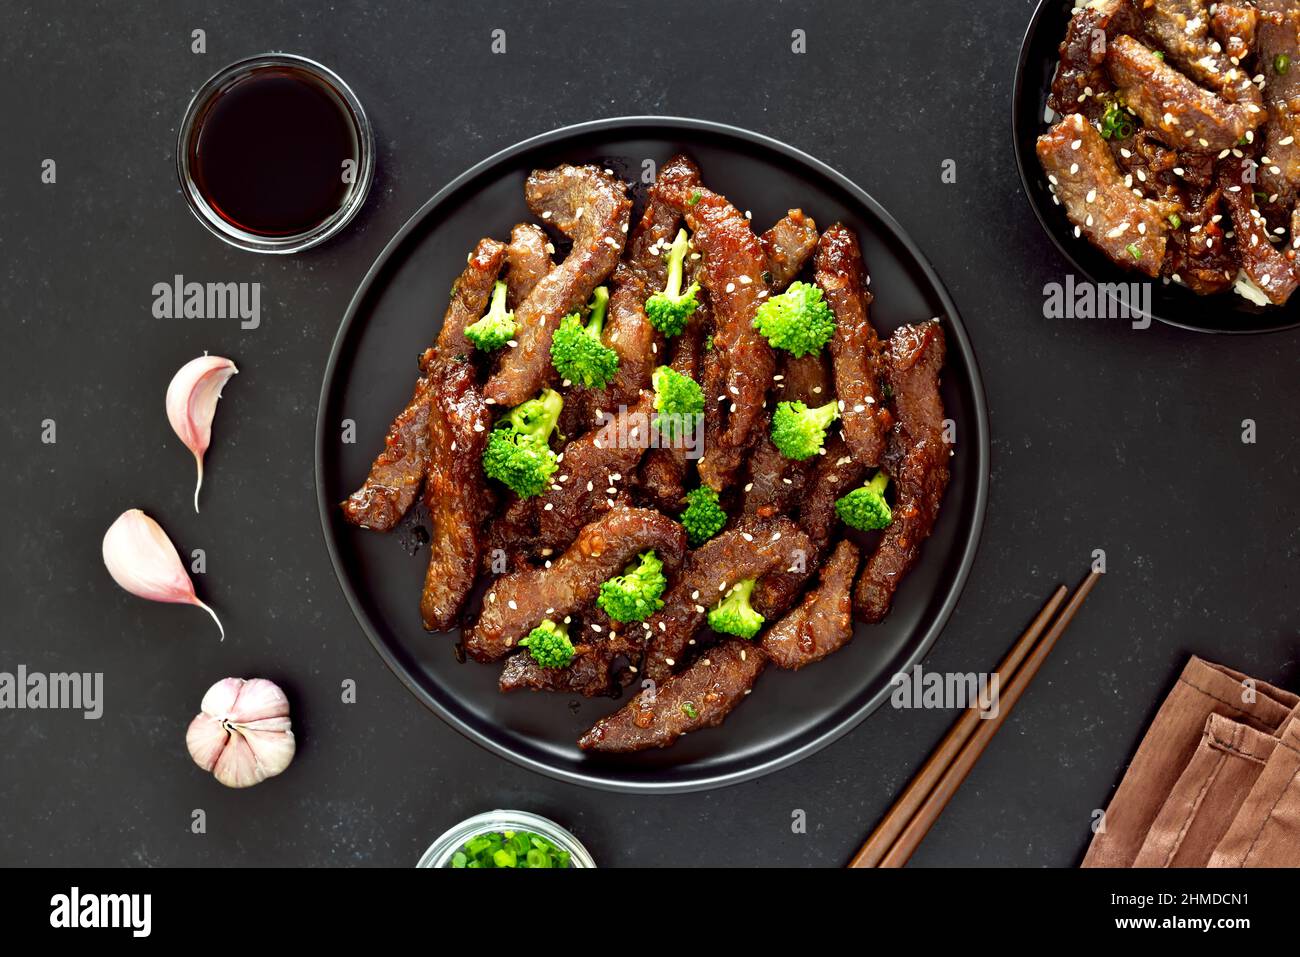 Beef and broccoli stir fry over dark background. Top view, flat lay Stock Photo